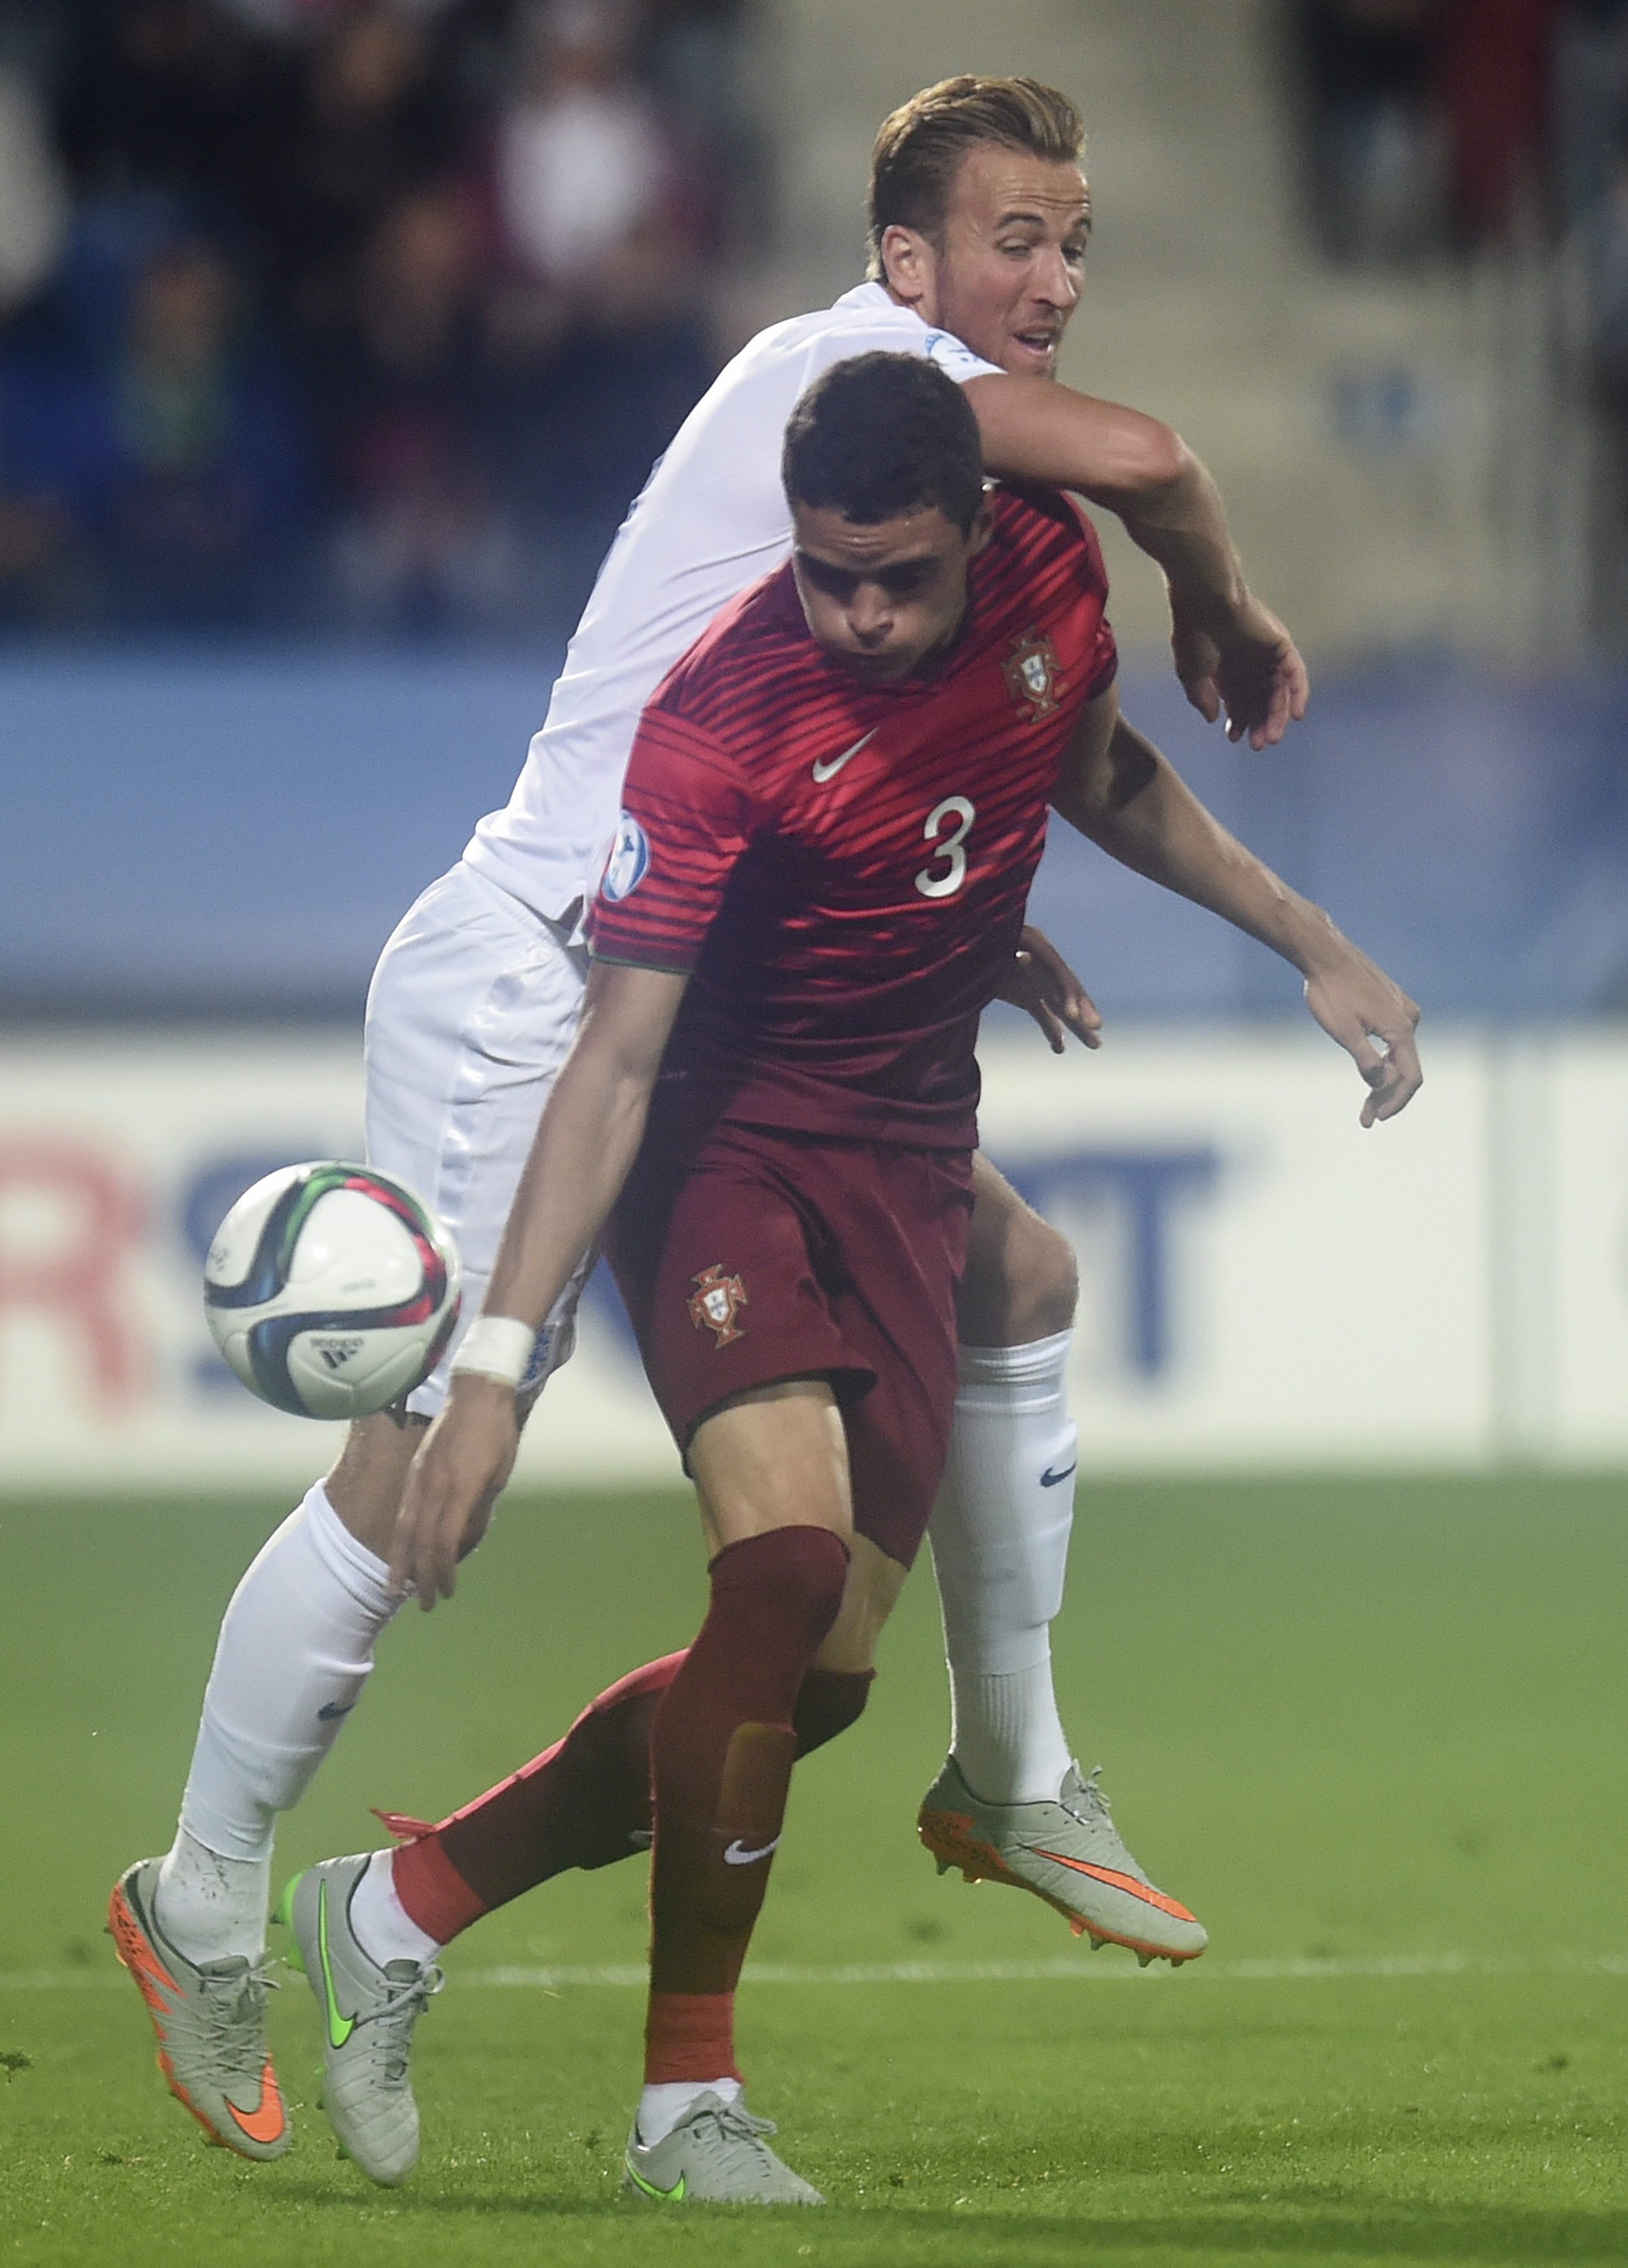 English player Harry Kane (back) vies for the ball with Portuguese  player  Tiago Ilori (R) during UEFA European Under-21 soccer championship match between England and Portugal at the City Stadium in Uherske Hradiste, Czech Republic on 18 June 2015